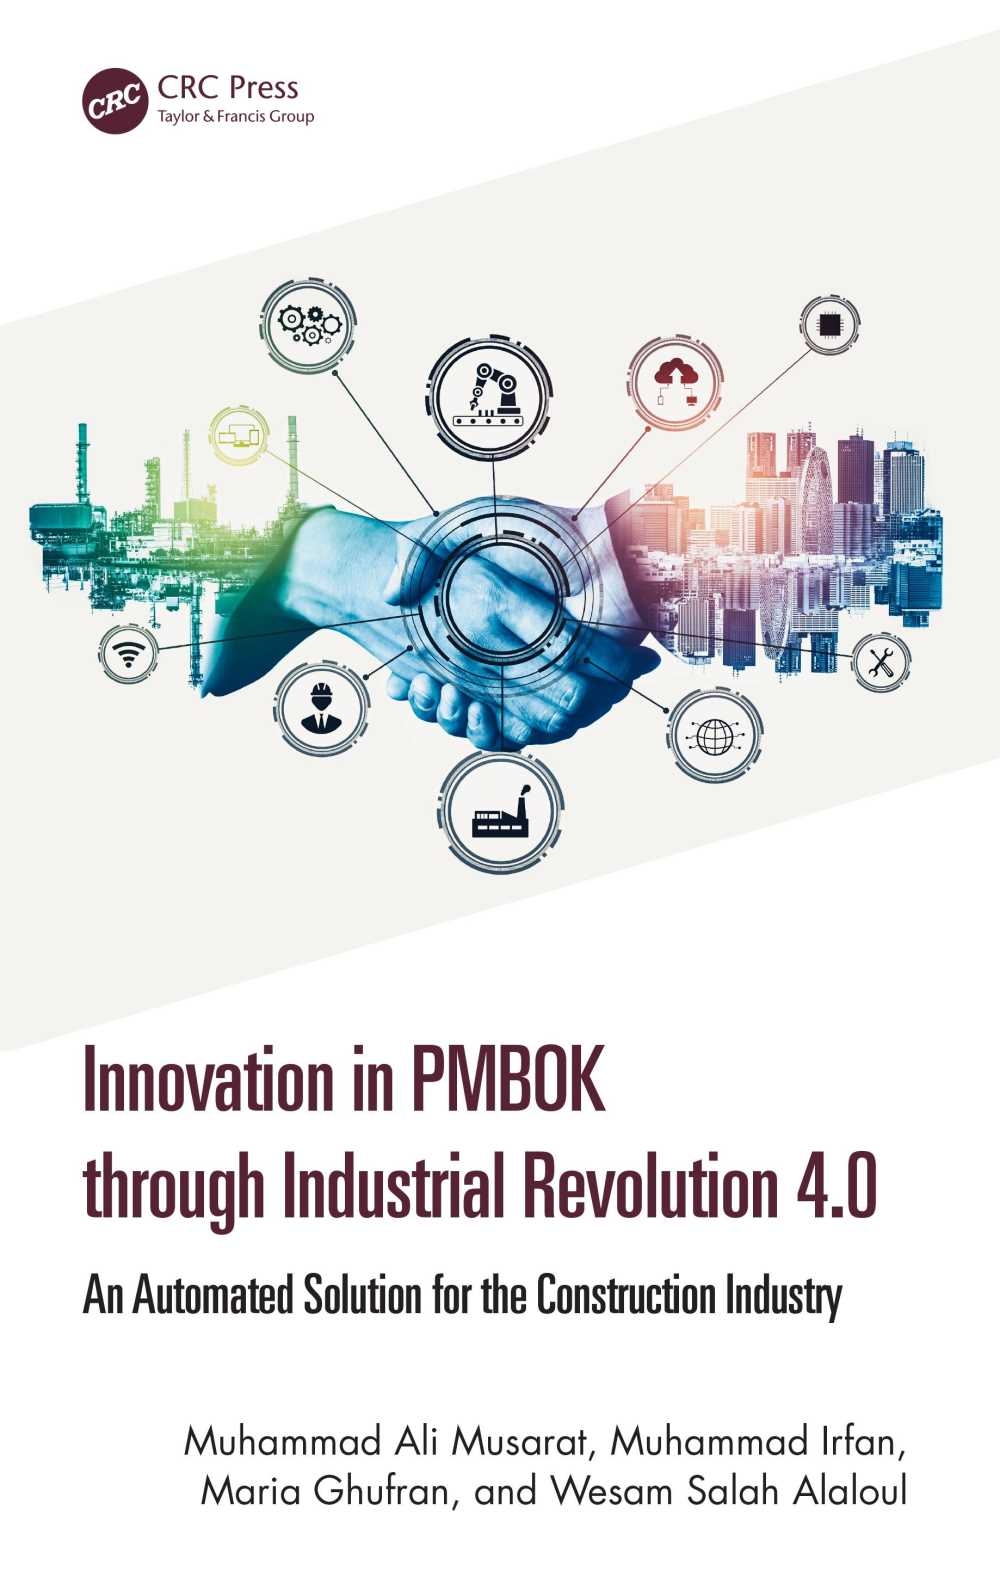 Innovation in Pmbok Through Industrial Revolution 4.0: An Automated Solution for the Construction Industry